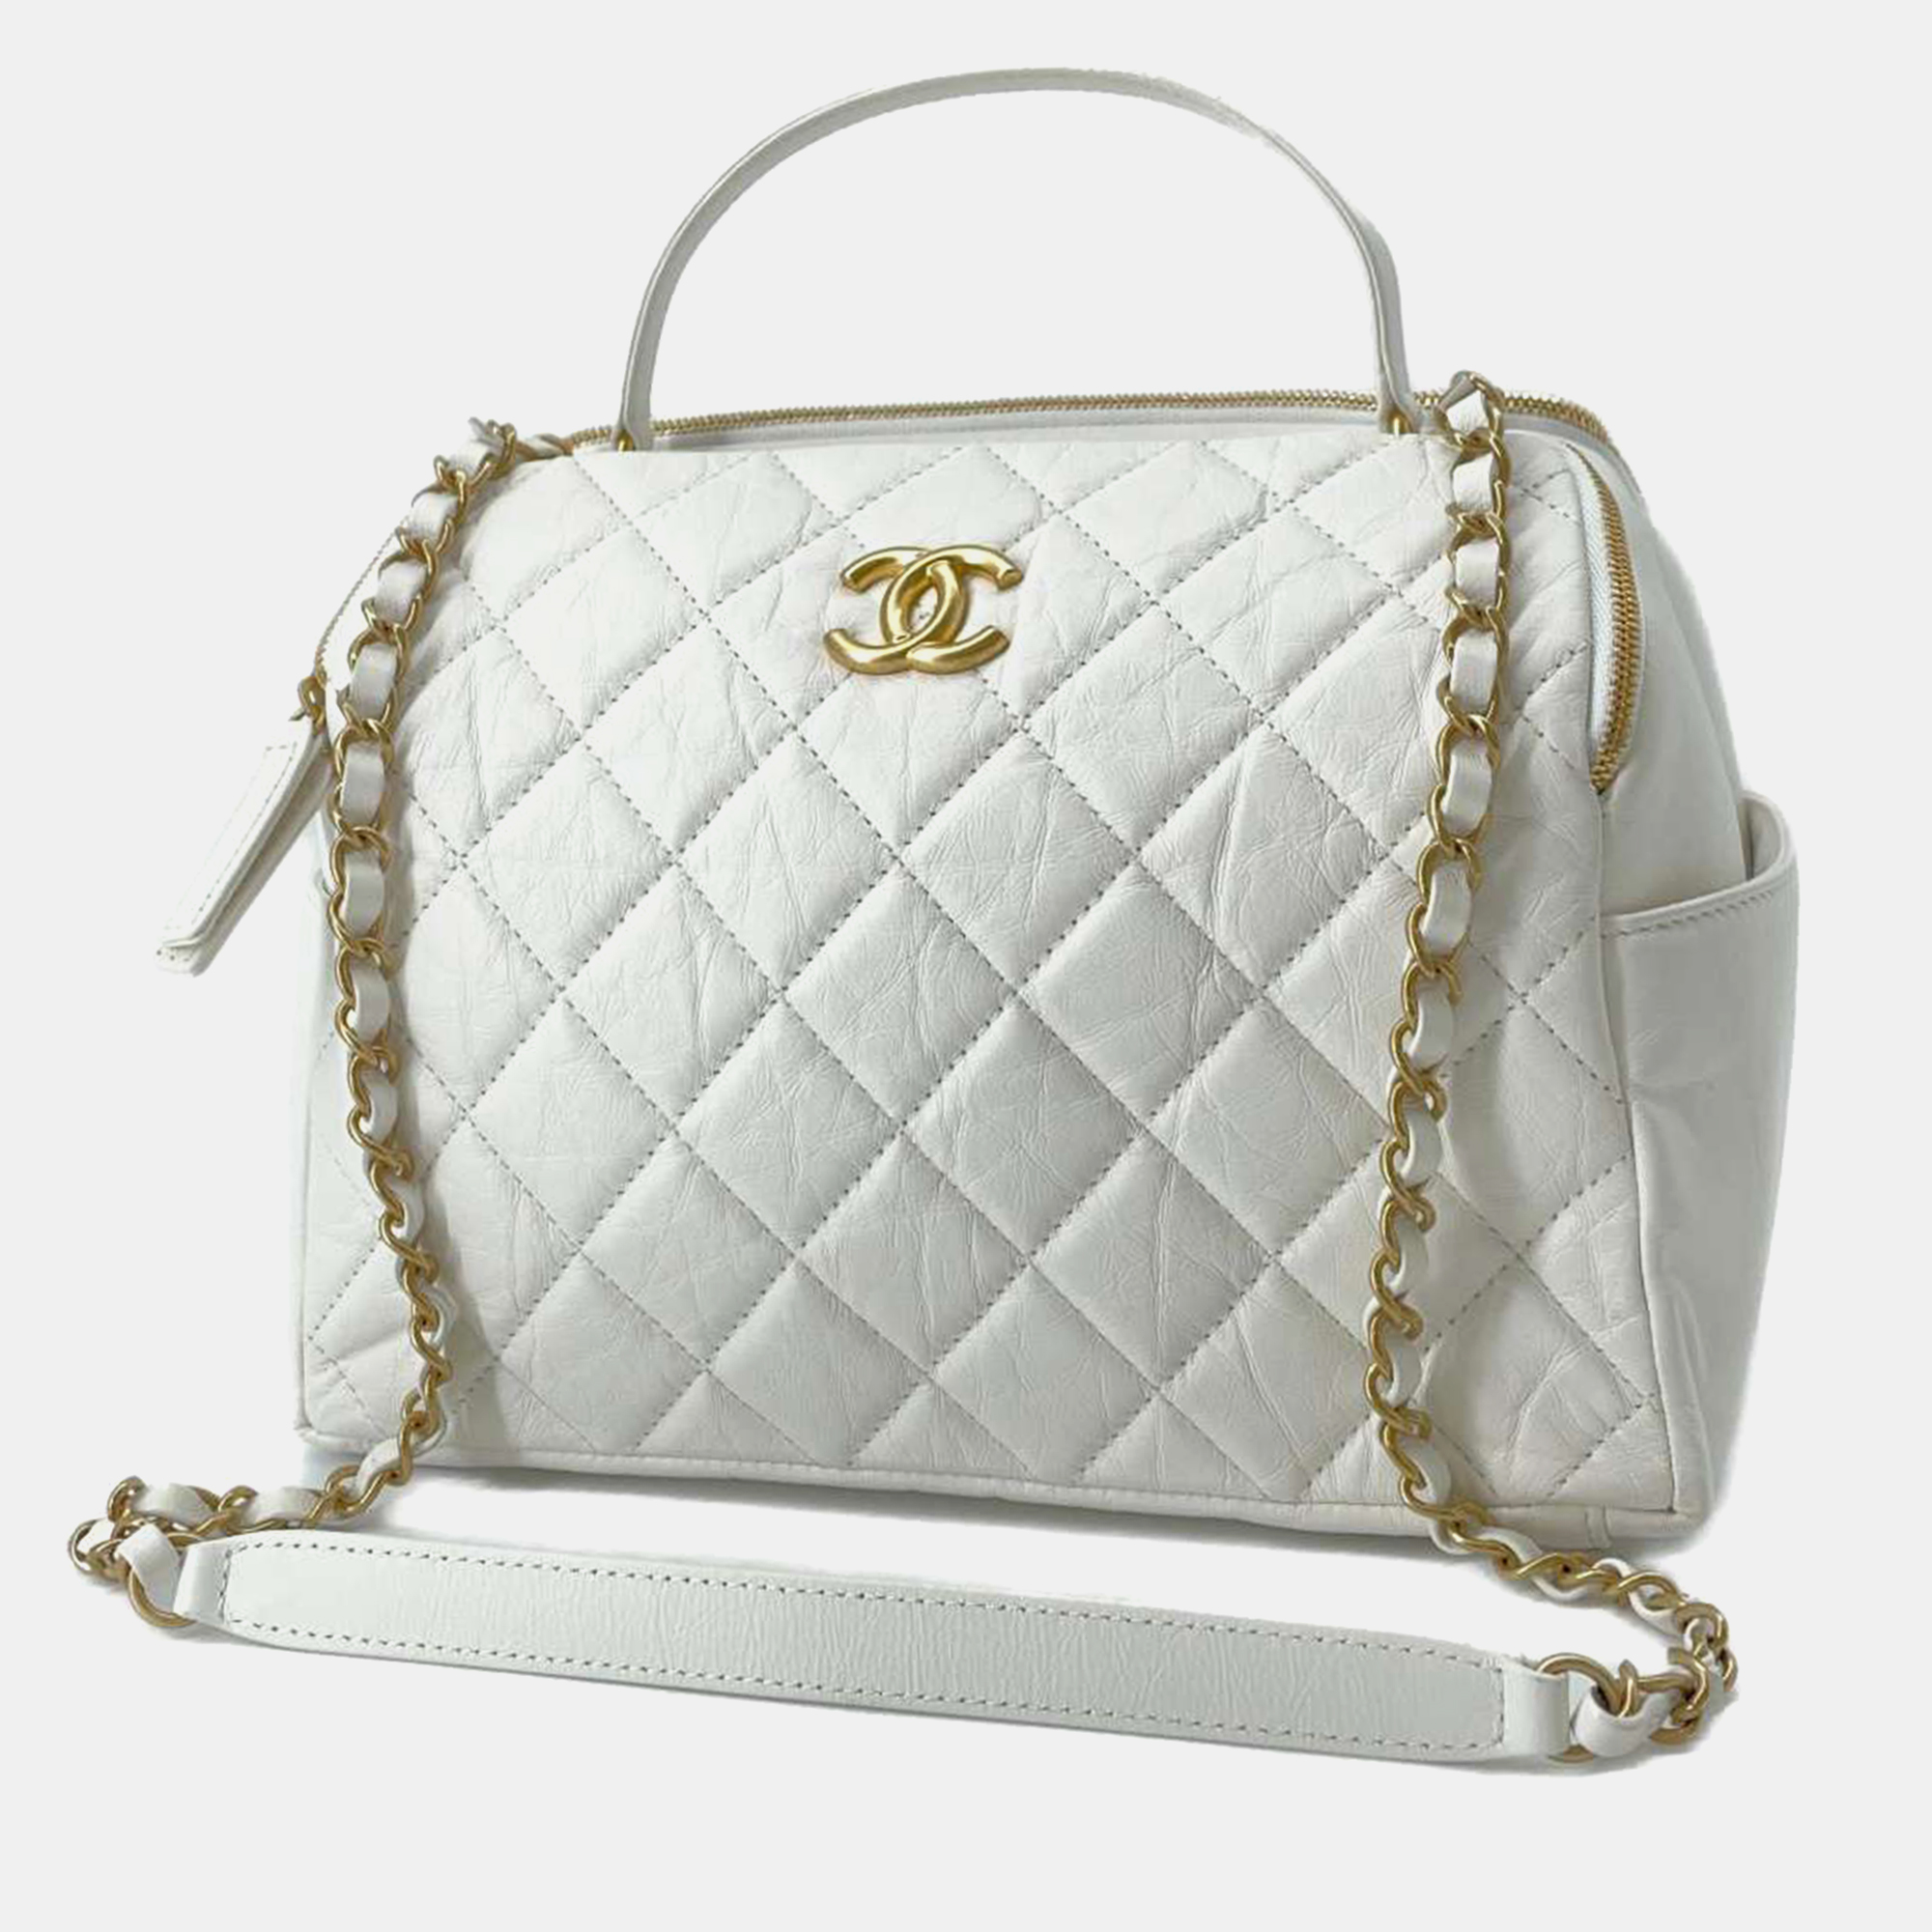 Pre-owned Chanel White Aged Calf Leather Shoulder Bag